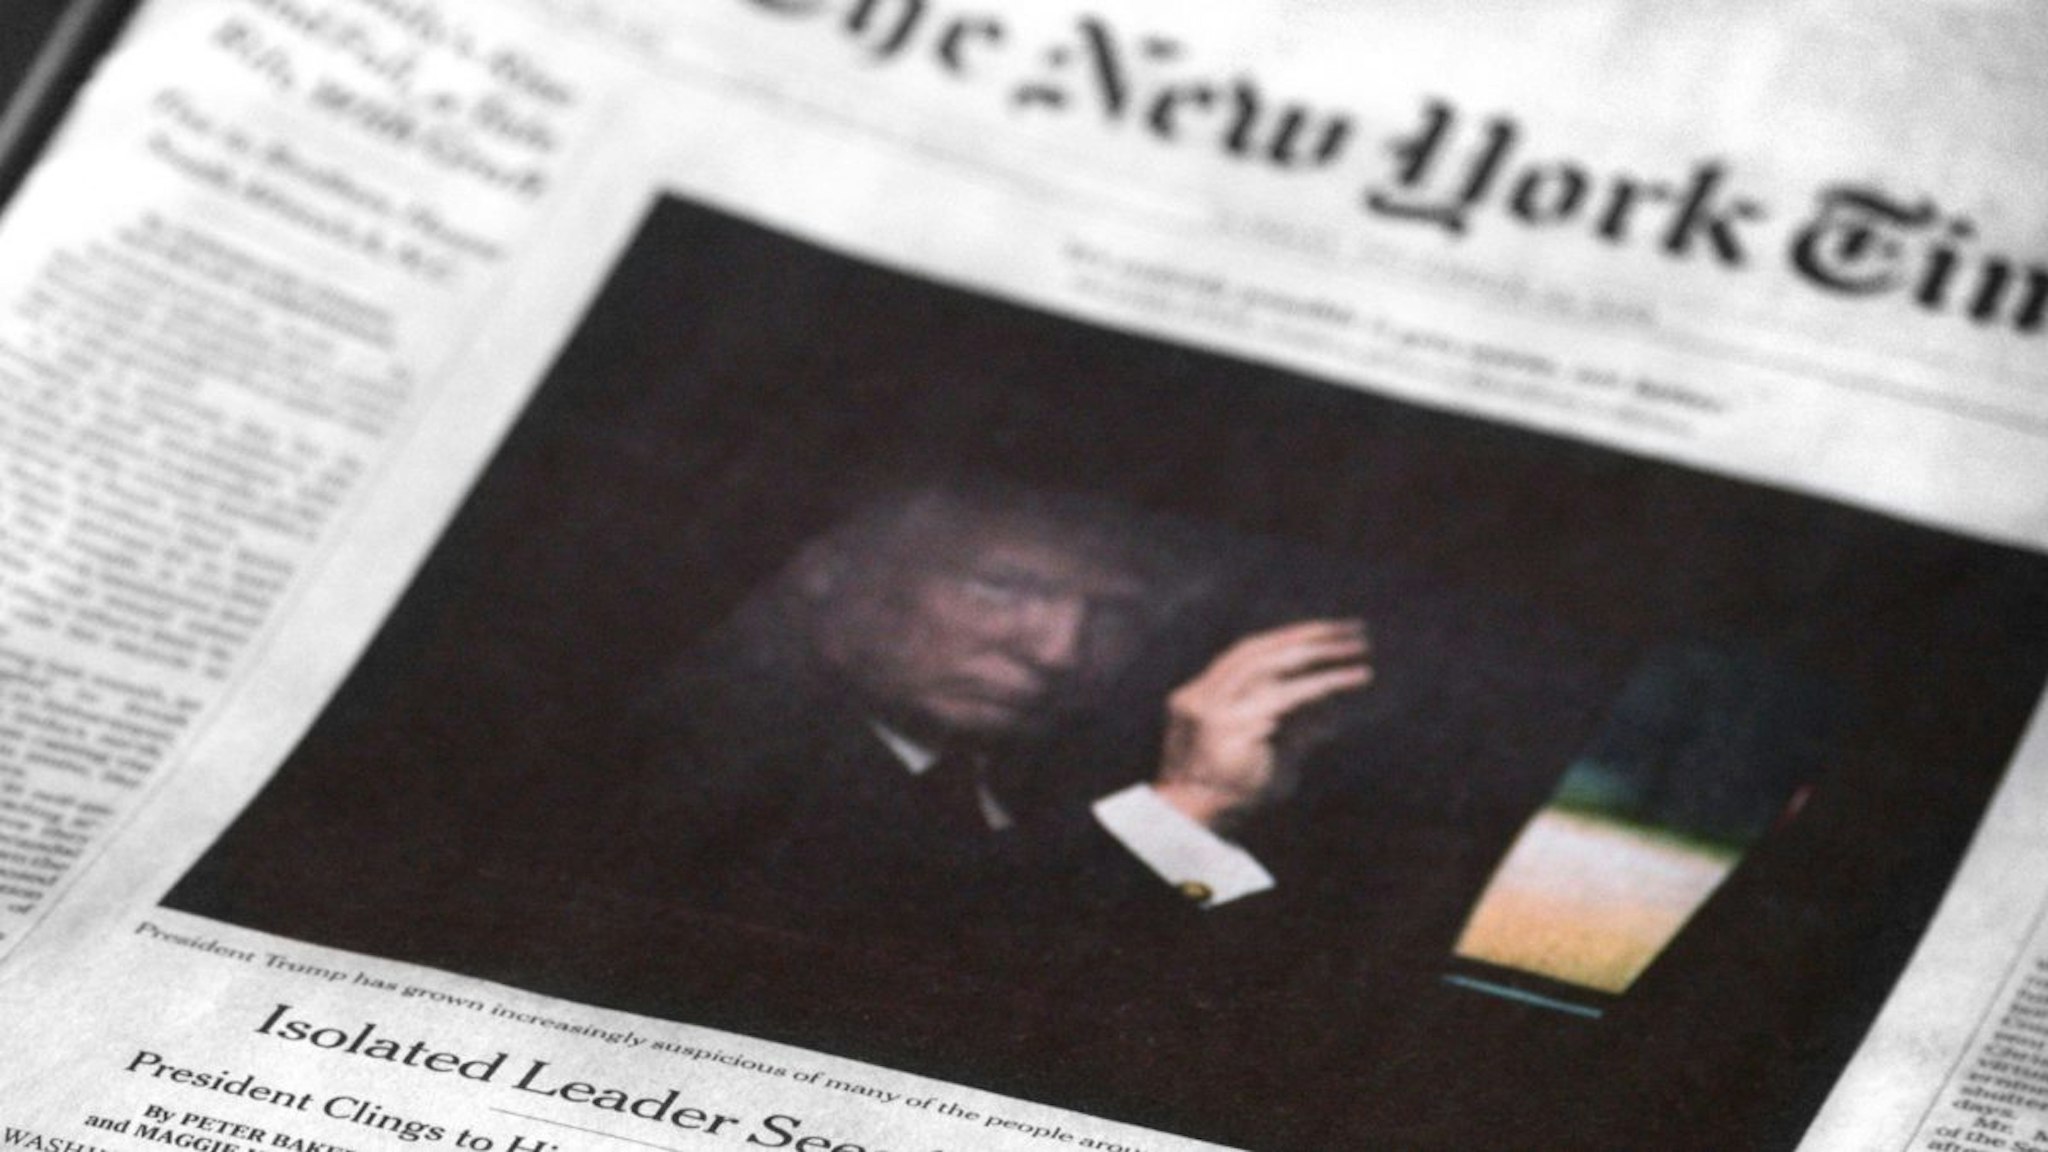 A copy of the December 23, 2018 edition of The New York Times features a front-page article by Peter Baker and Maggie Haberman referring to U.S. President Donald Trump as an isolated leader who sees 'a war every day.'